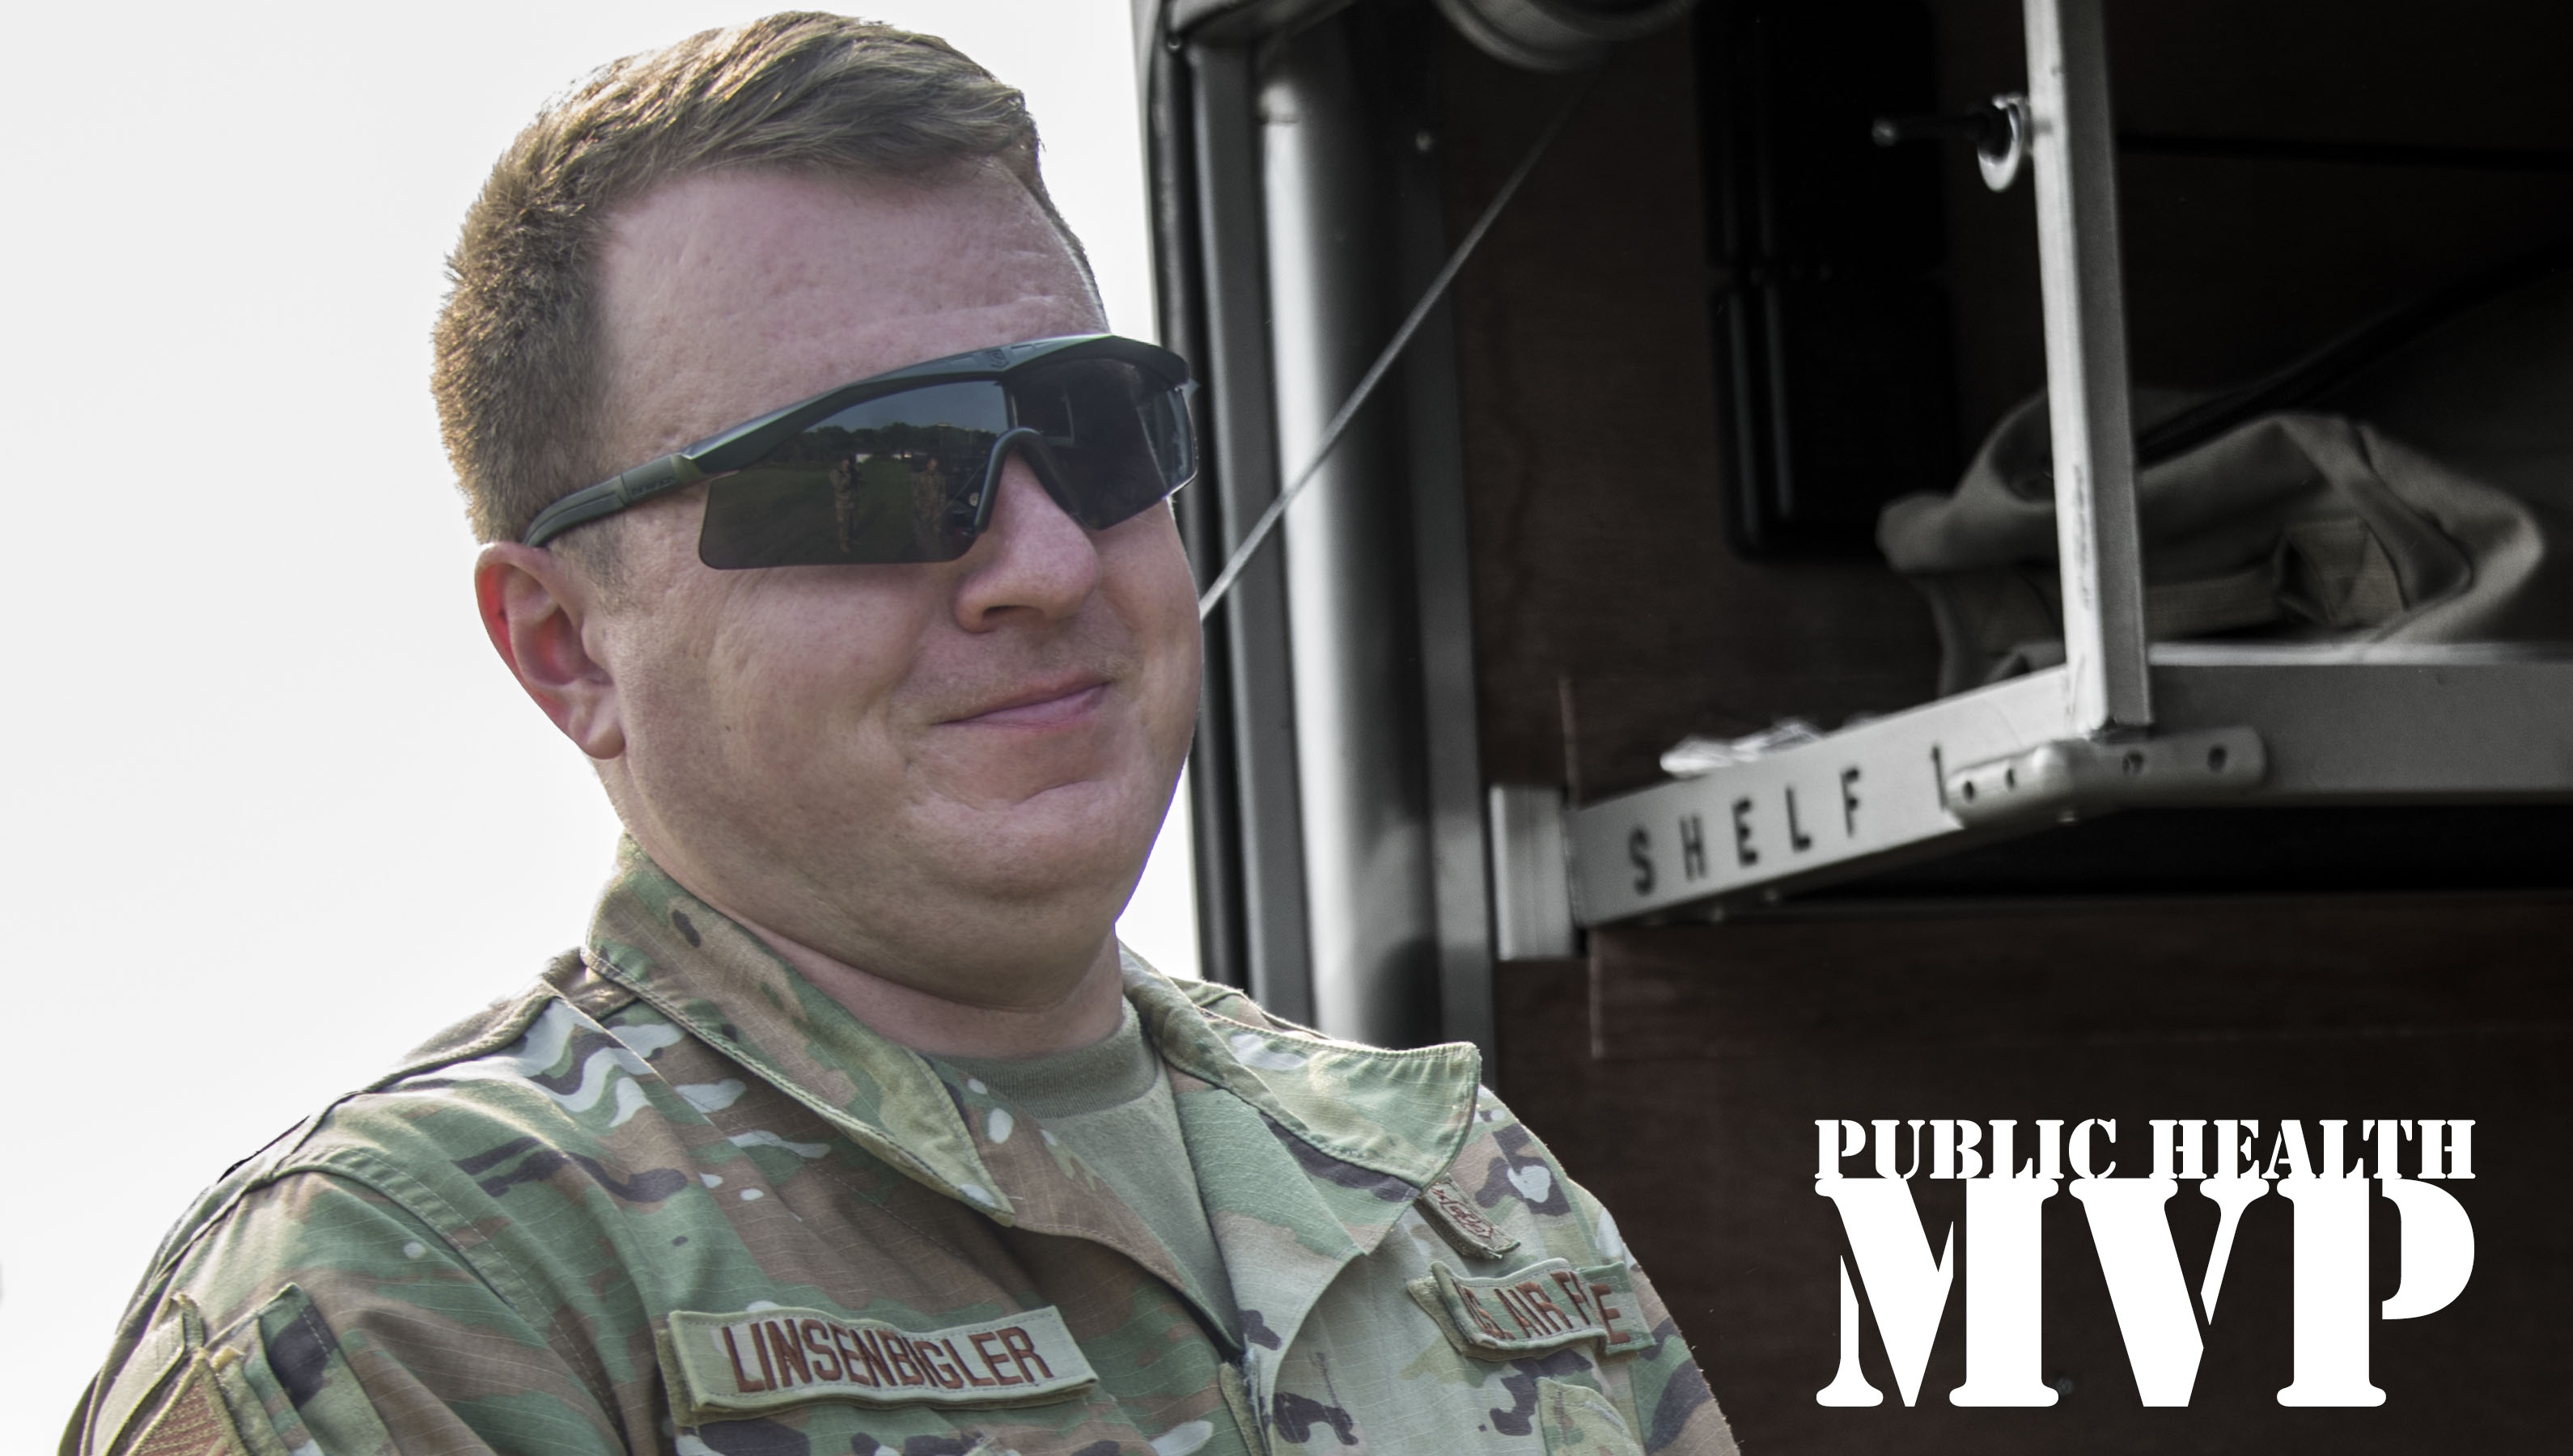 Tech. Sgt. Jacob Linsenbigler is one of Public Health's Most Valuable Players